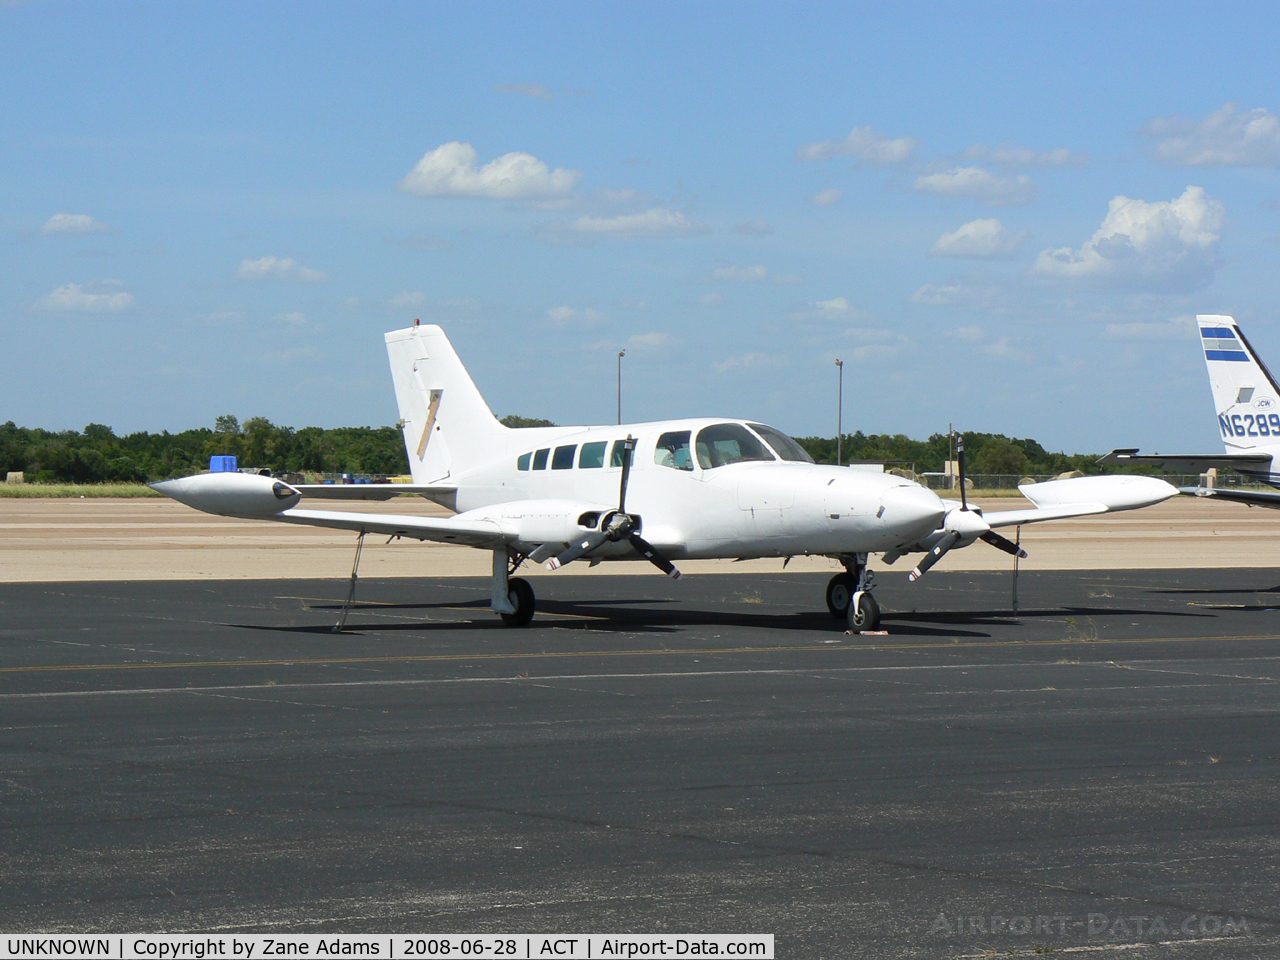 UNKNOWN, , Unmarked Cessna 421 at Waco Regional